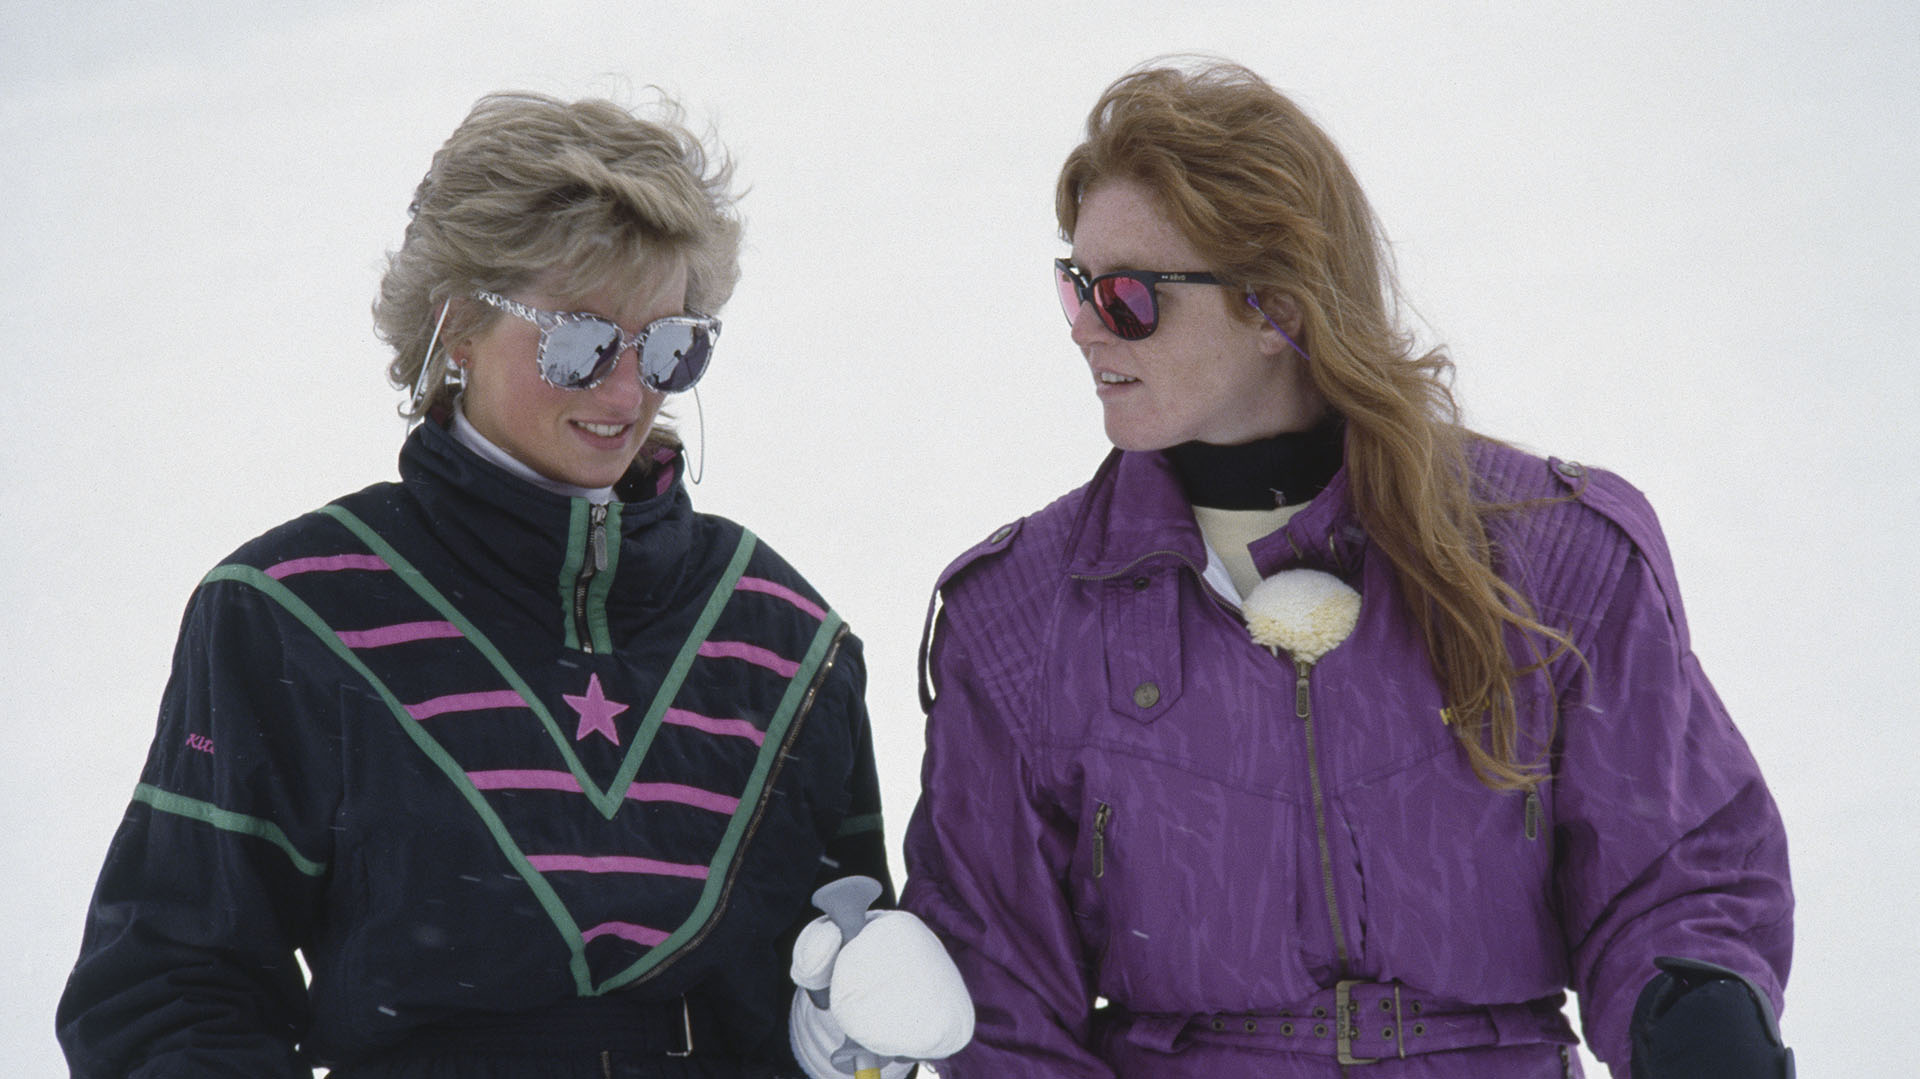 Princess Diana (1961 - 1997, left) with the Duchess of York during a skiing holiday in Klosters, Switzerland, 9th March 1988. (Photo by James Andanson/Sygma via Getty Images)